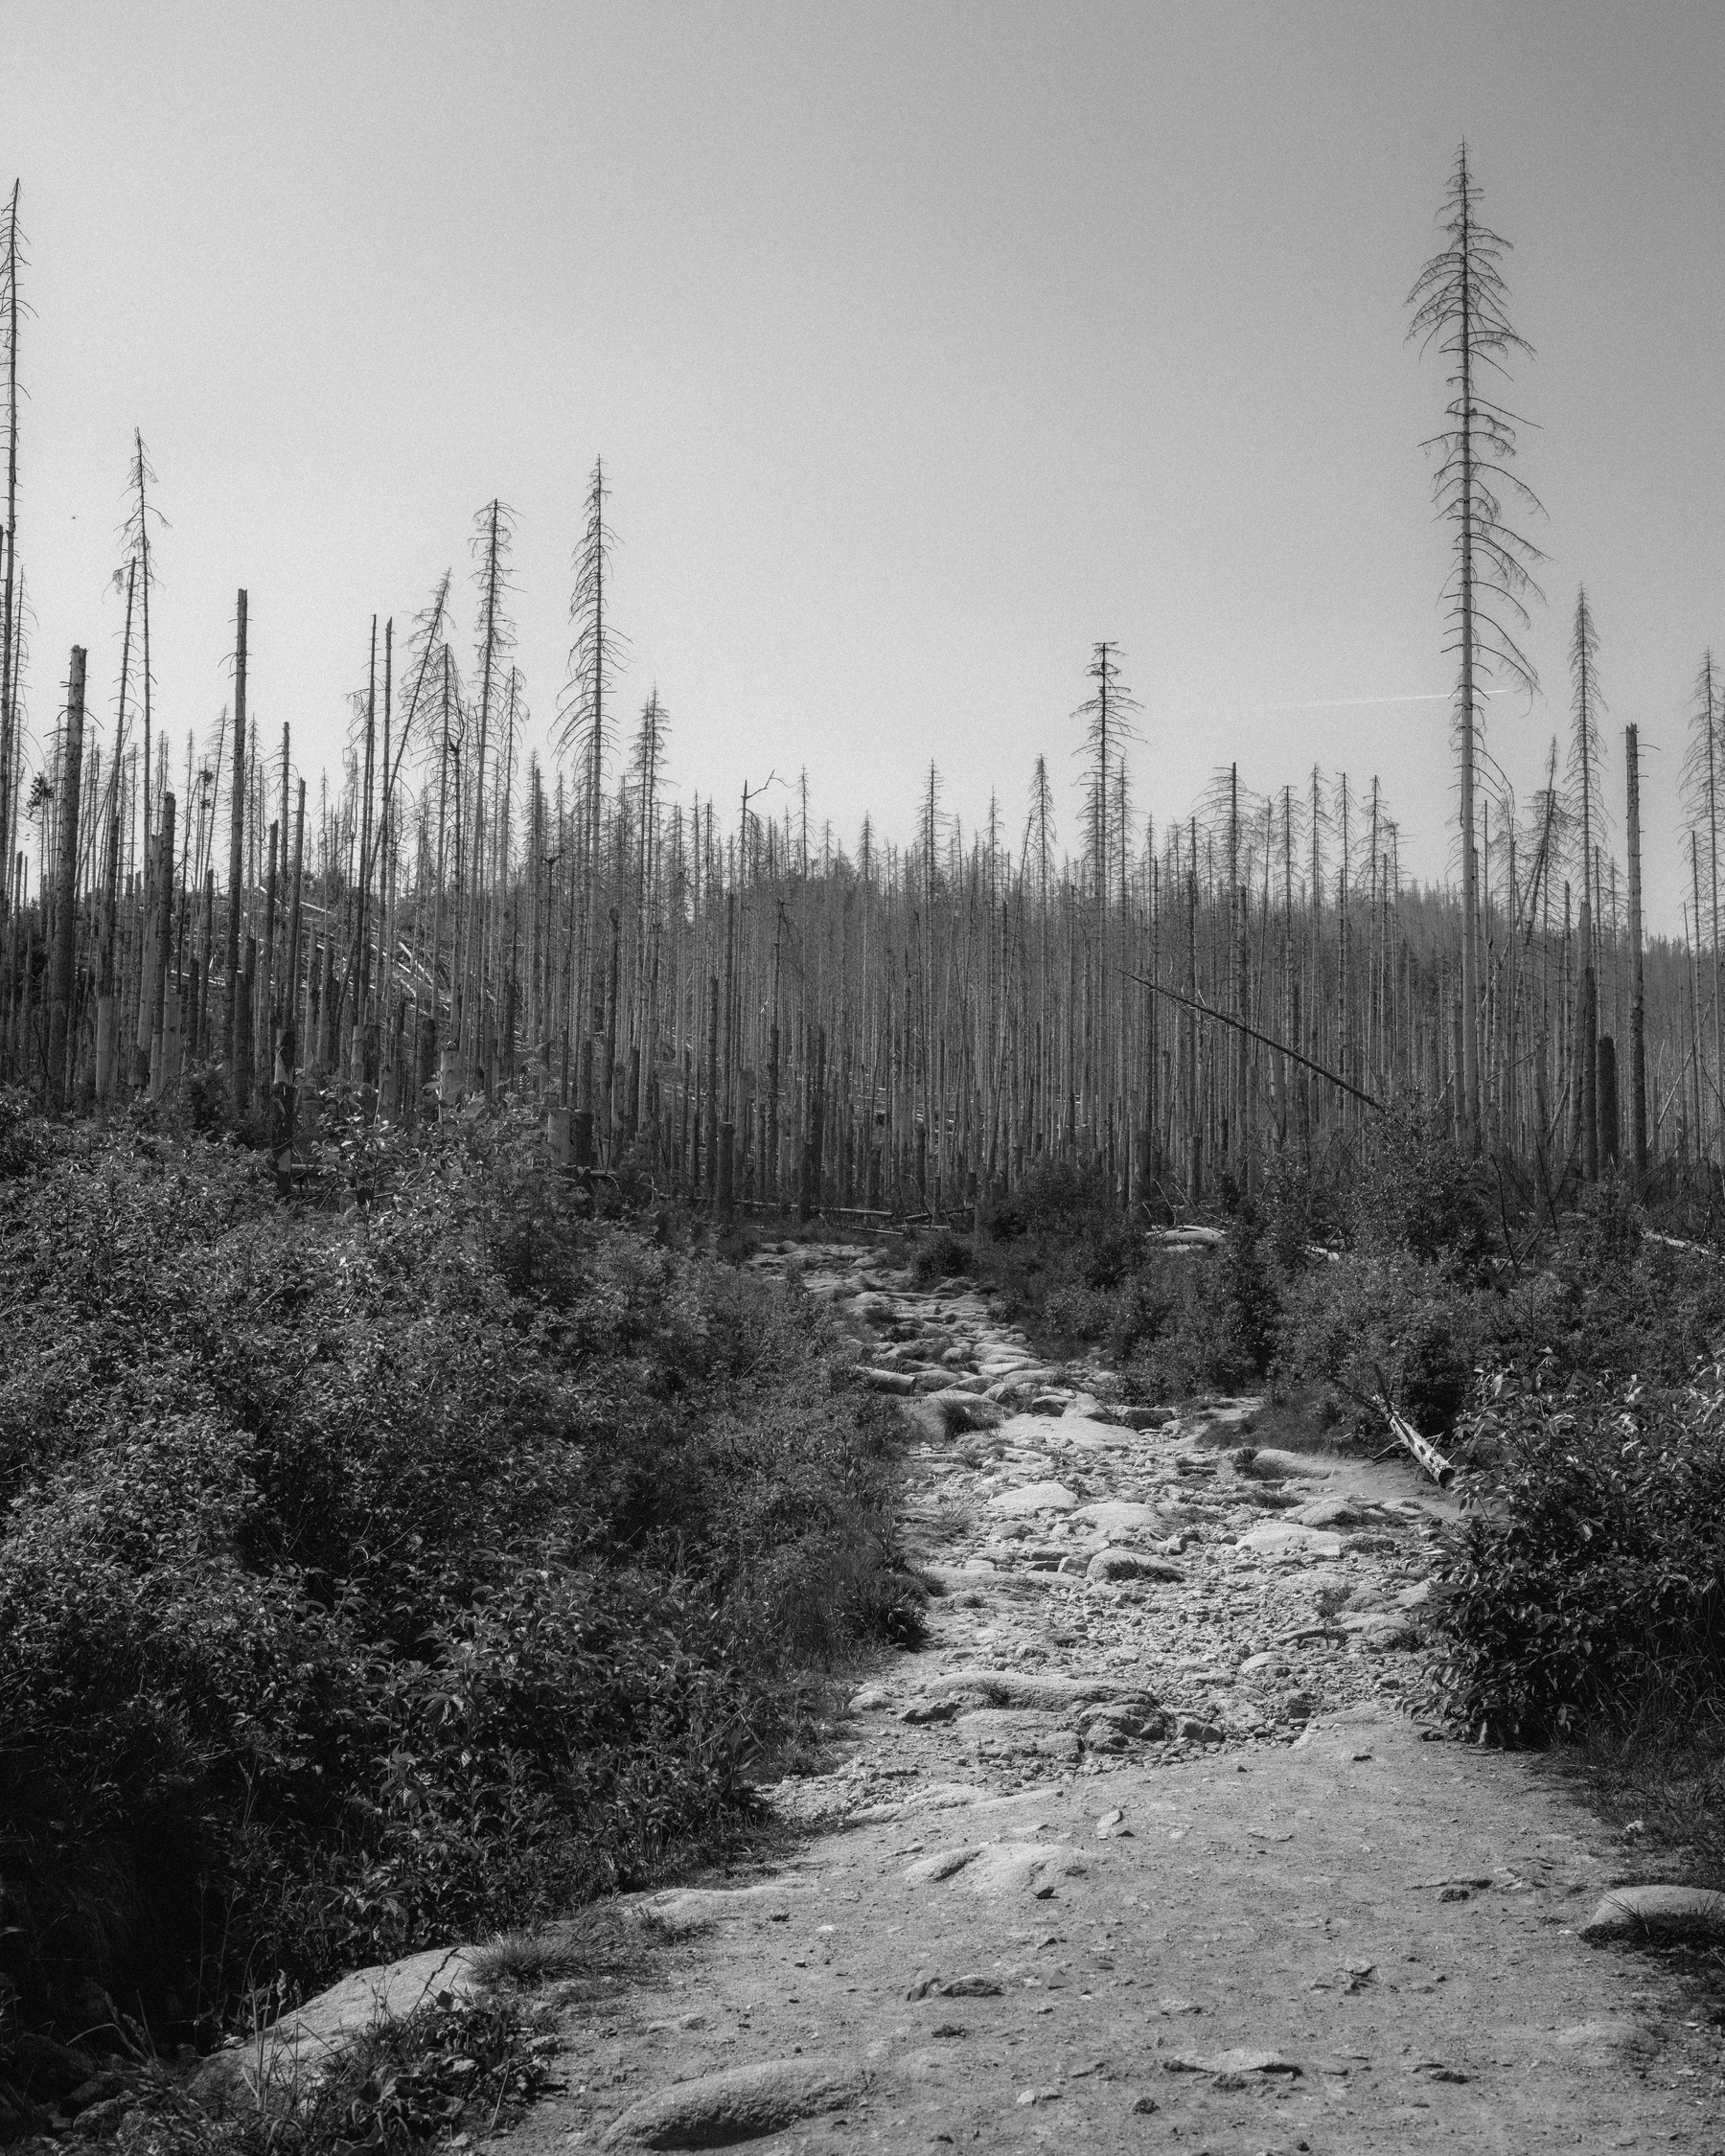 A rocky trail lined with dead and bare trees. The photo is black and white. It's hard to believe it was taken in the middle of summer, as even the standing trees are bare.